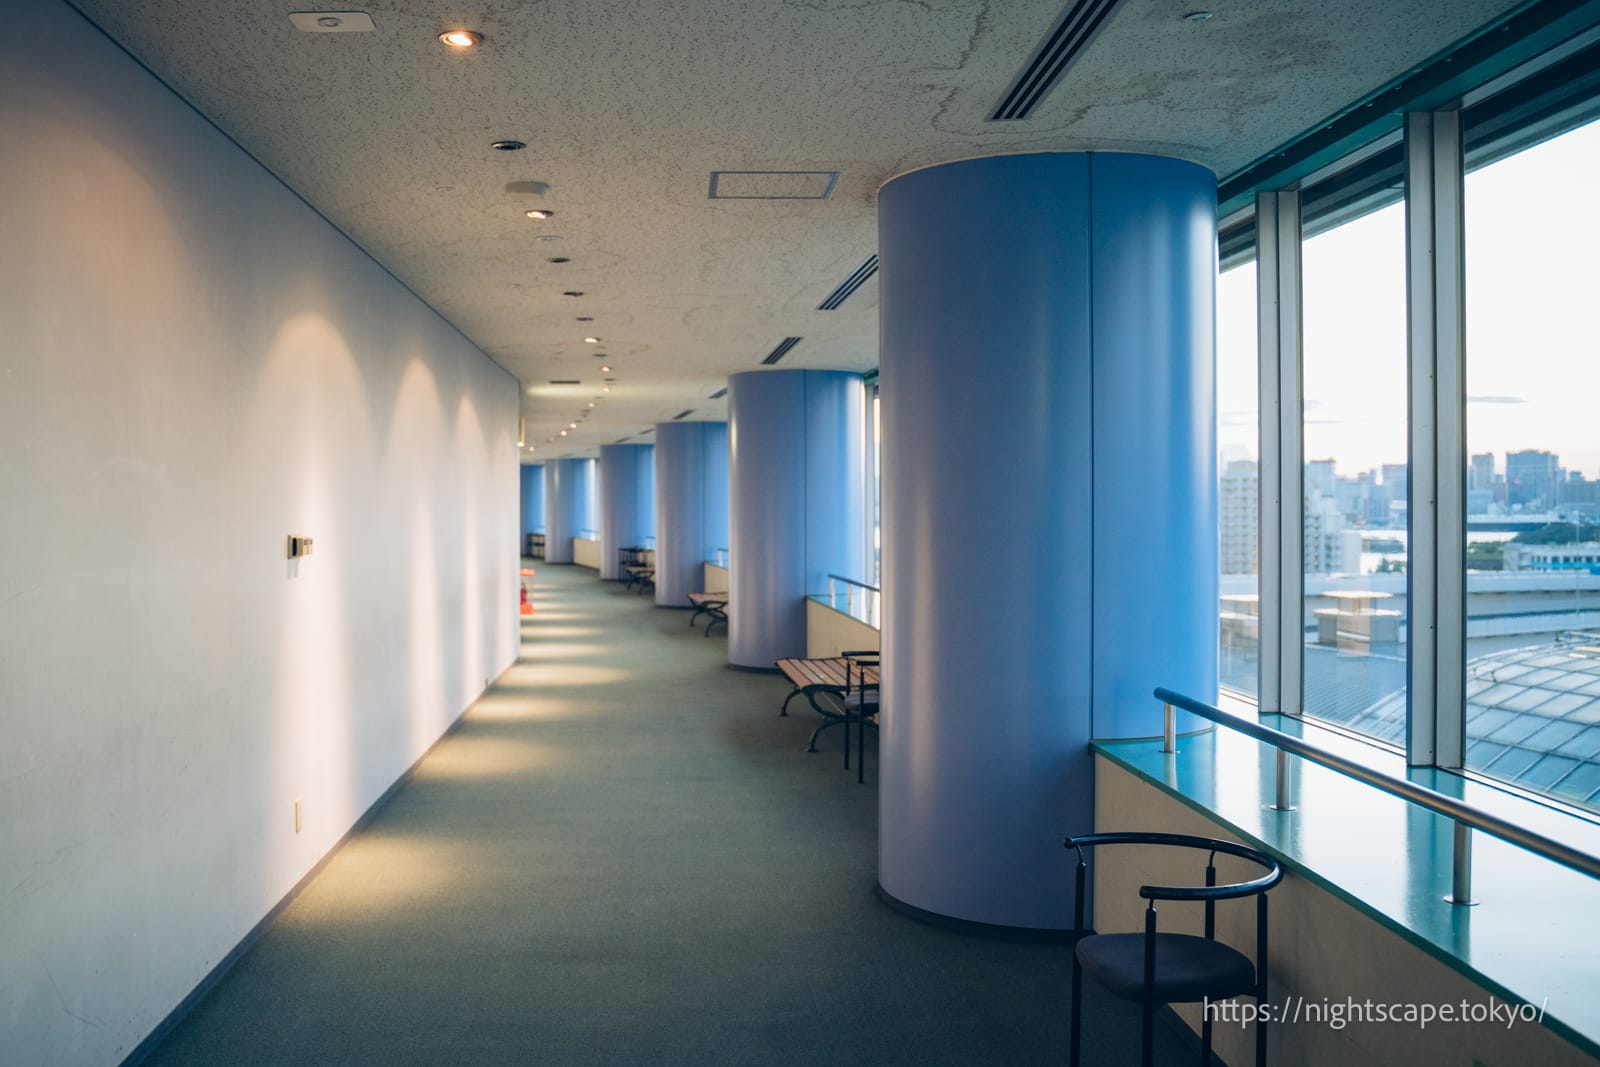 Atmosphere of the Ariake Sports Centre observation corridor.